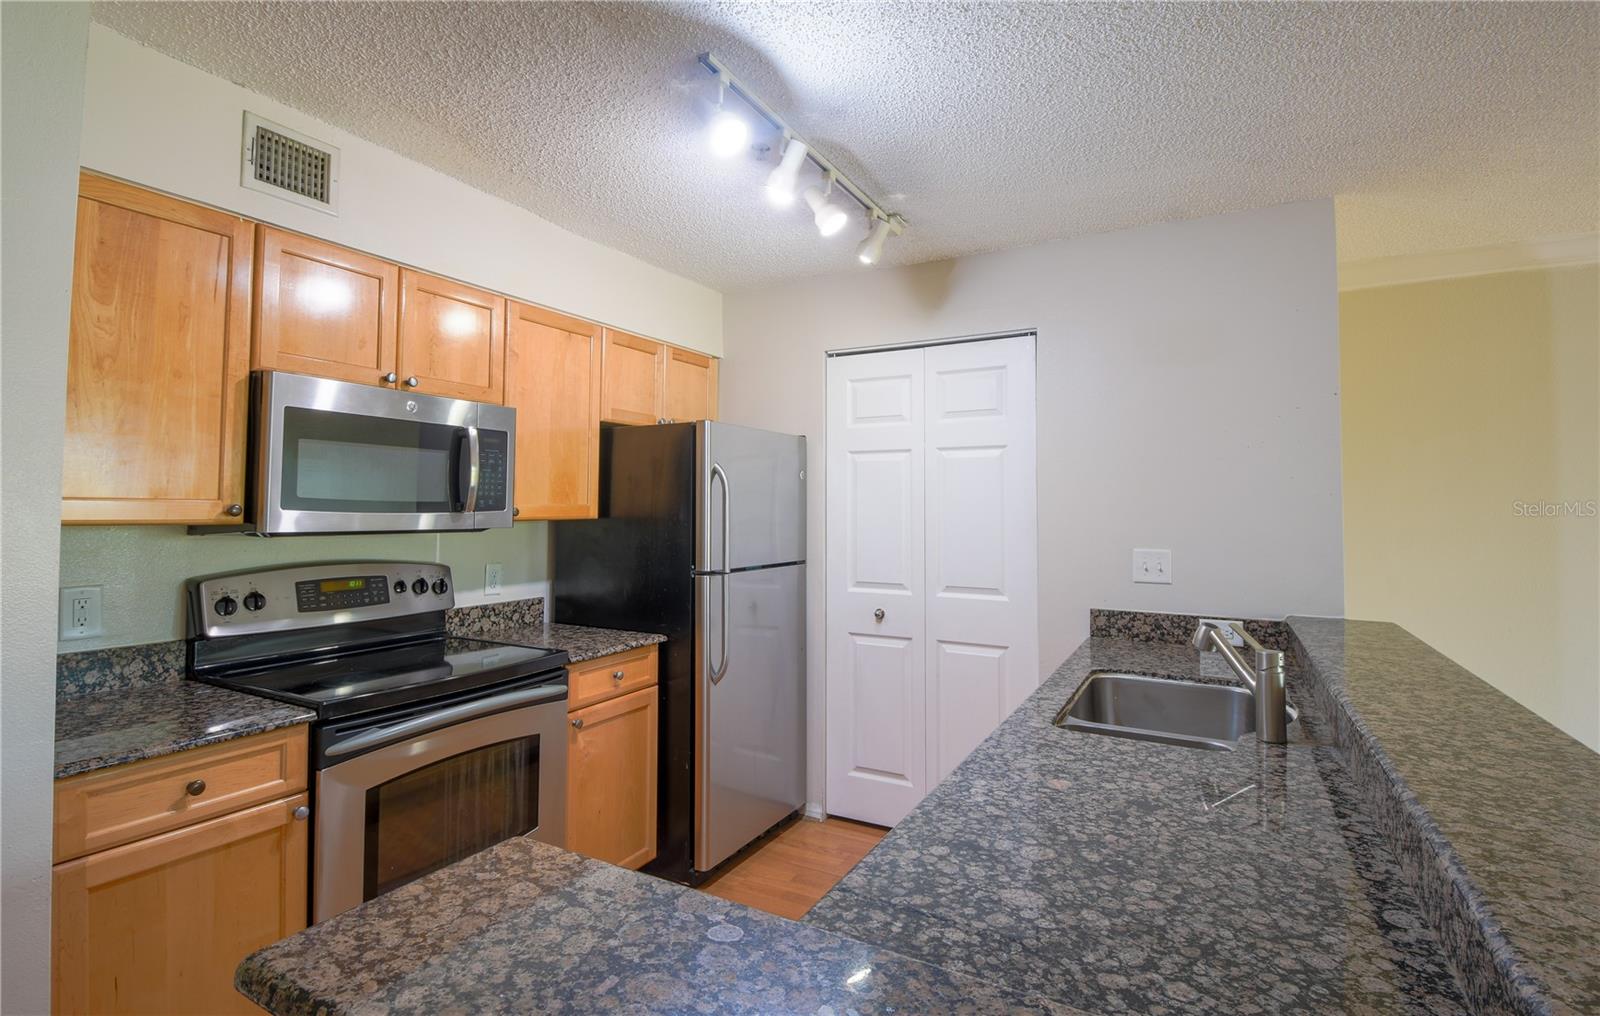 The kitchen has wood cabinetry and granite countertops.